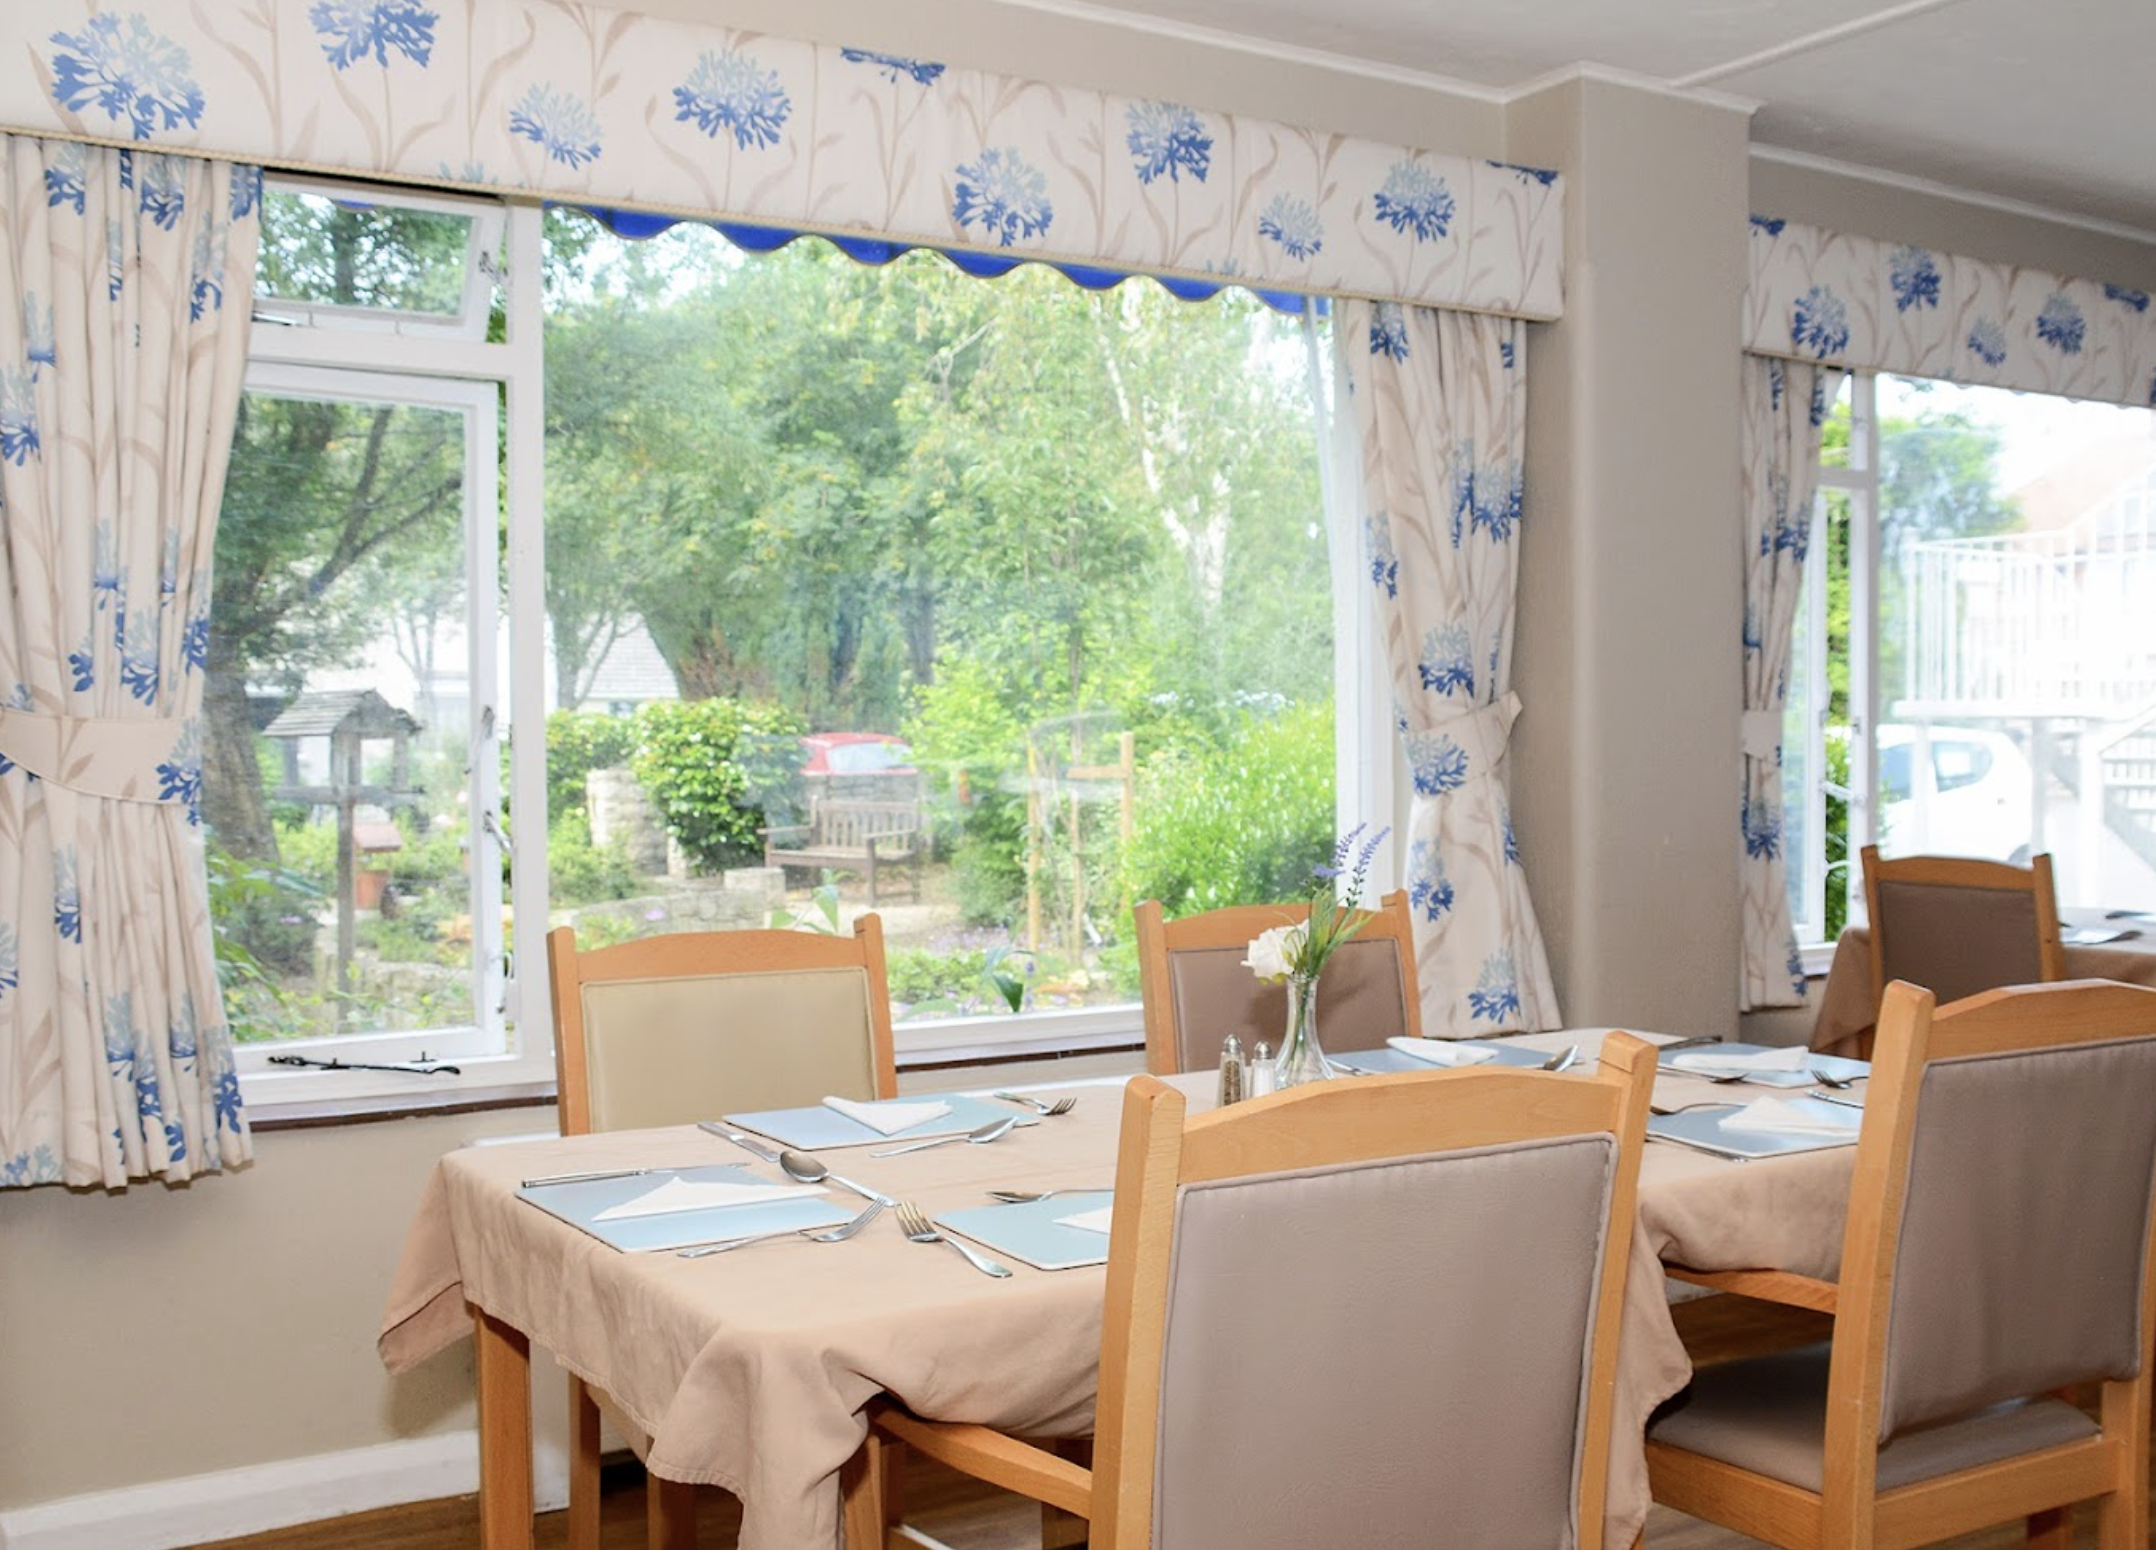 Dining room of Dorset House care home in Poole, Hampshire